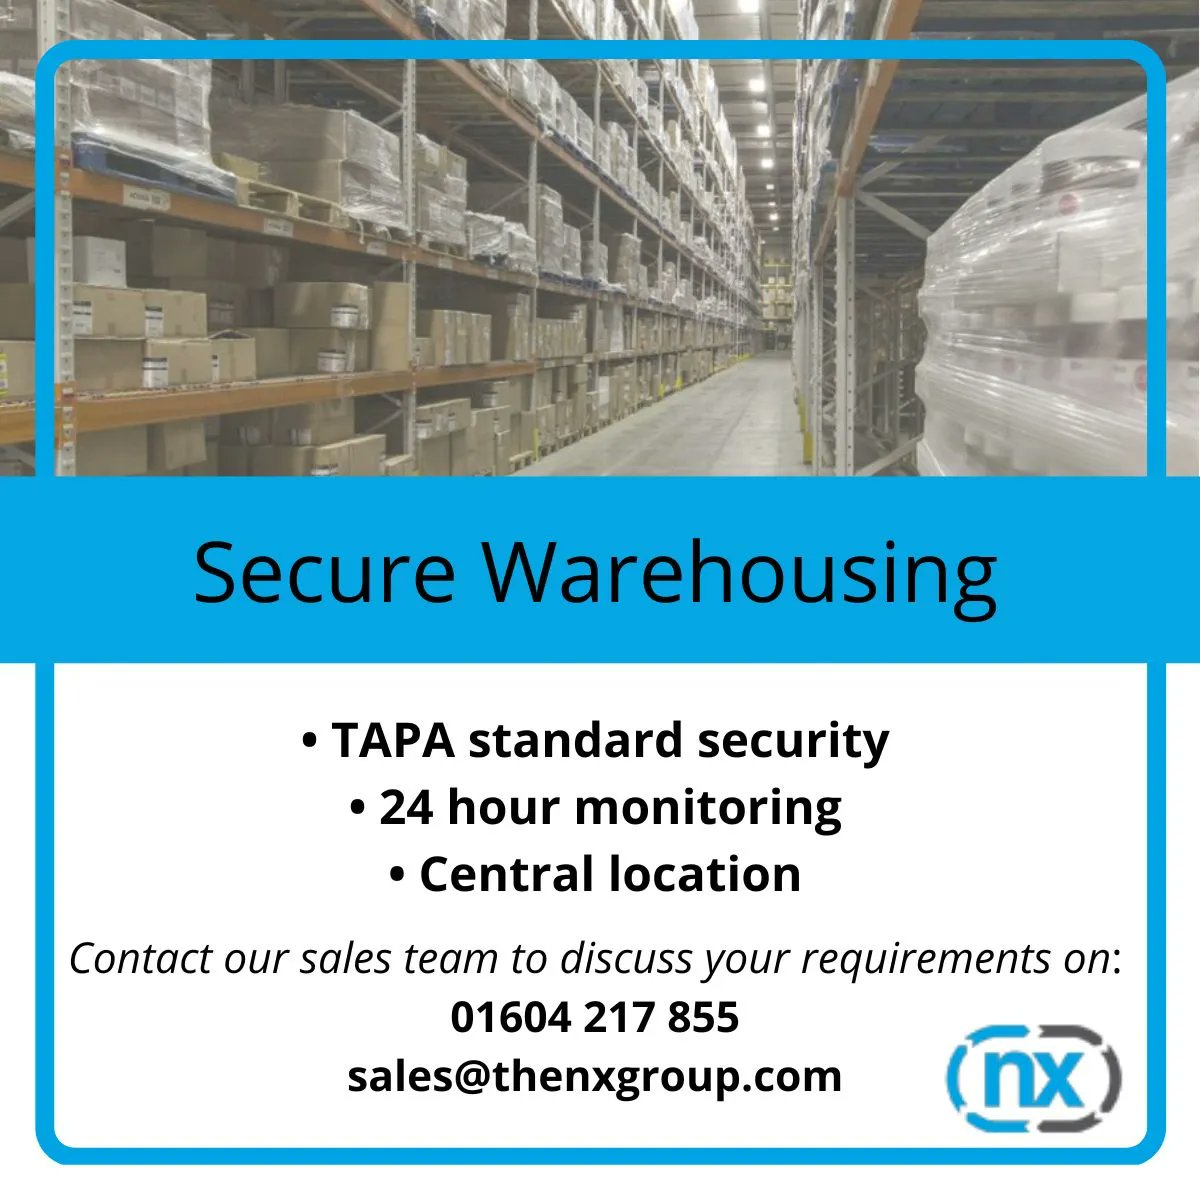 *SECURE WAREHOUSING* Do you need a #warehousing solution for your #highvaluegoods? The NX Group's warehouse facilities are: •TAPA standard security •24hr guarded •Monitored with internal & external CCTV •Centrally based. Contact us to find out more…  #securewarehousing